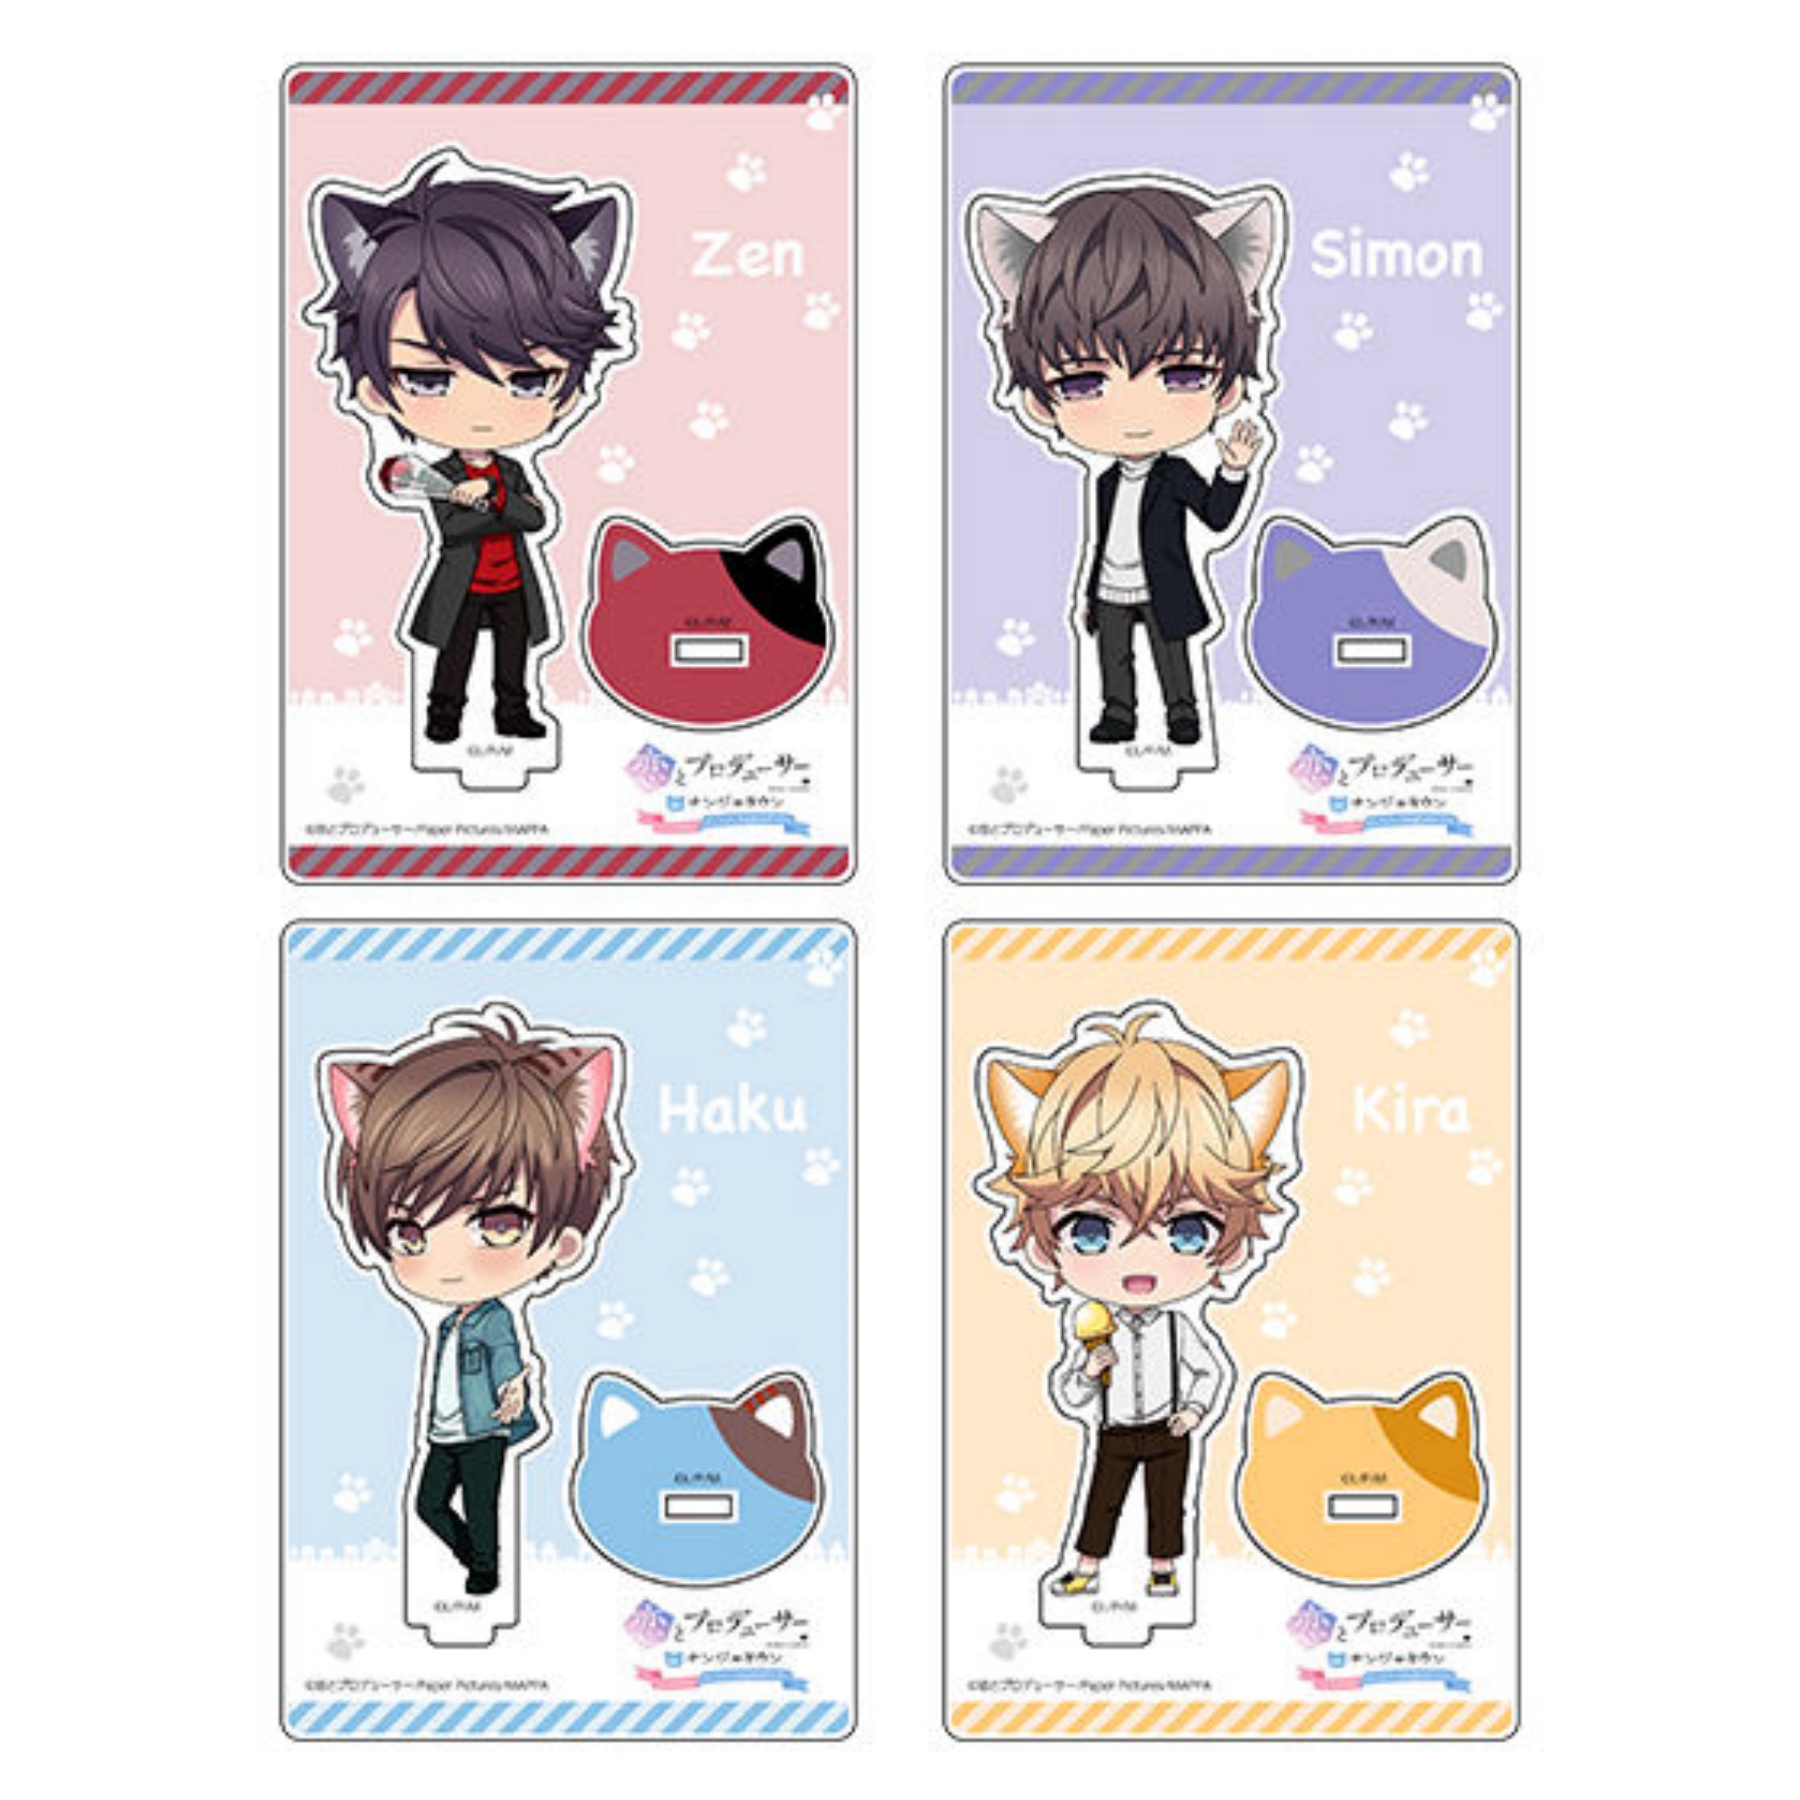  A3 Koi to Producer ~ EVOL x Love ~ 11 Zen Wishes for Chiro  [Official Illustration] Character Acrylic Figure : Toys & Games